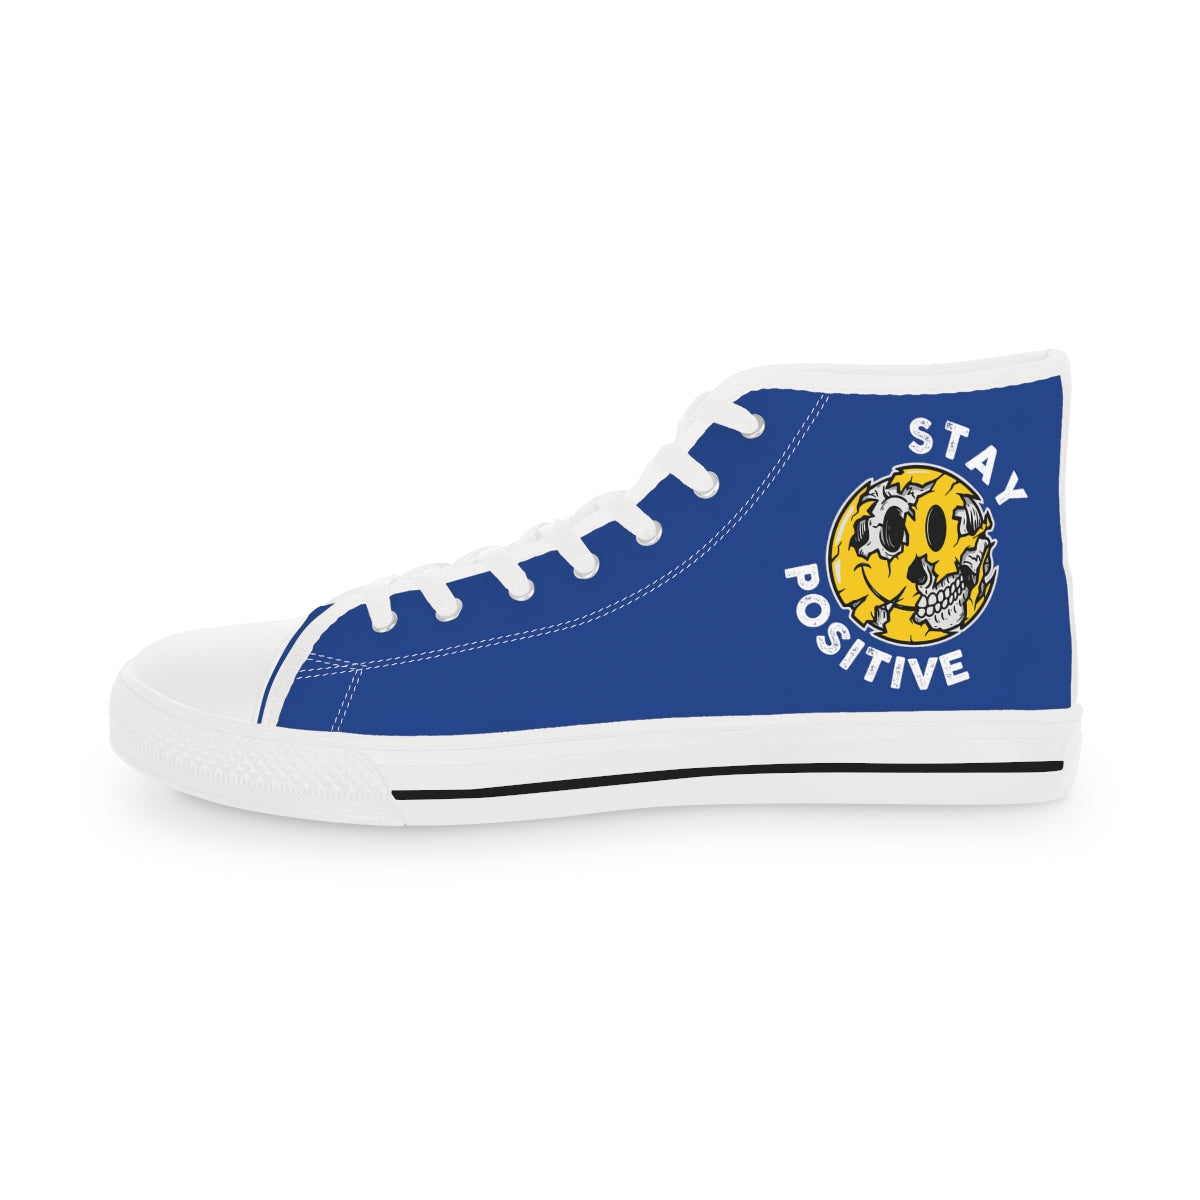 Stay Positive [Blue] - Men's High Top Sneakers